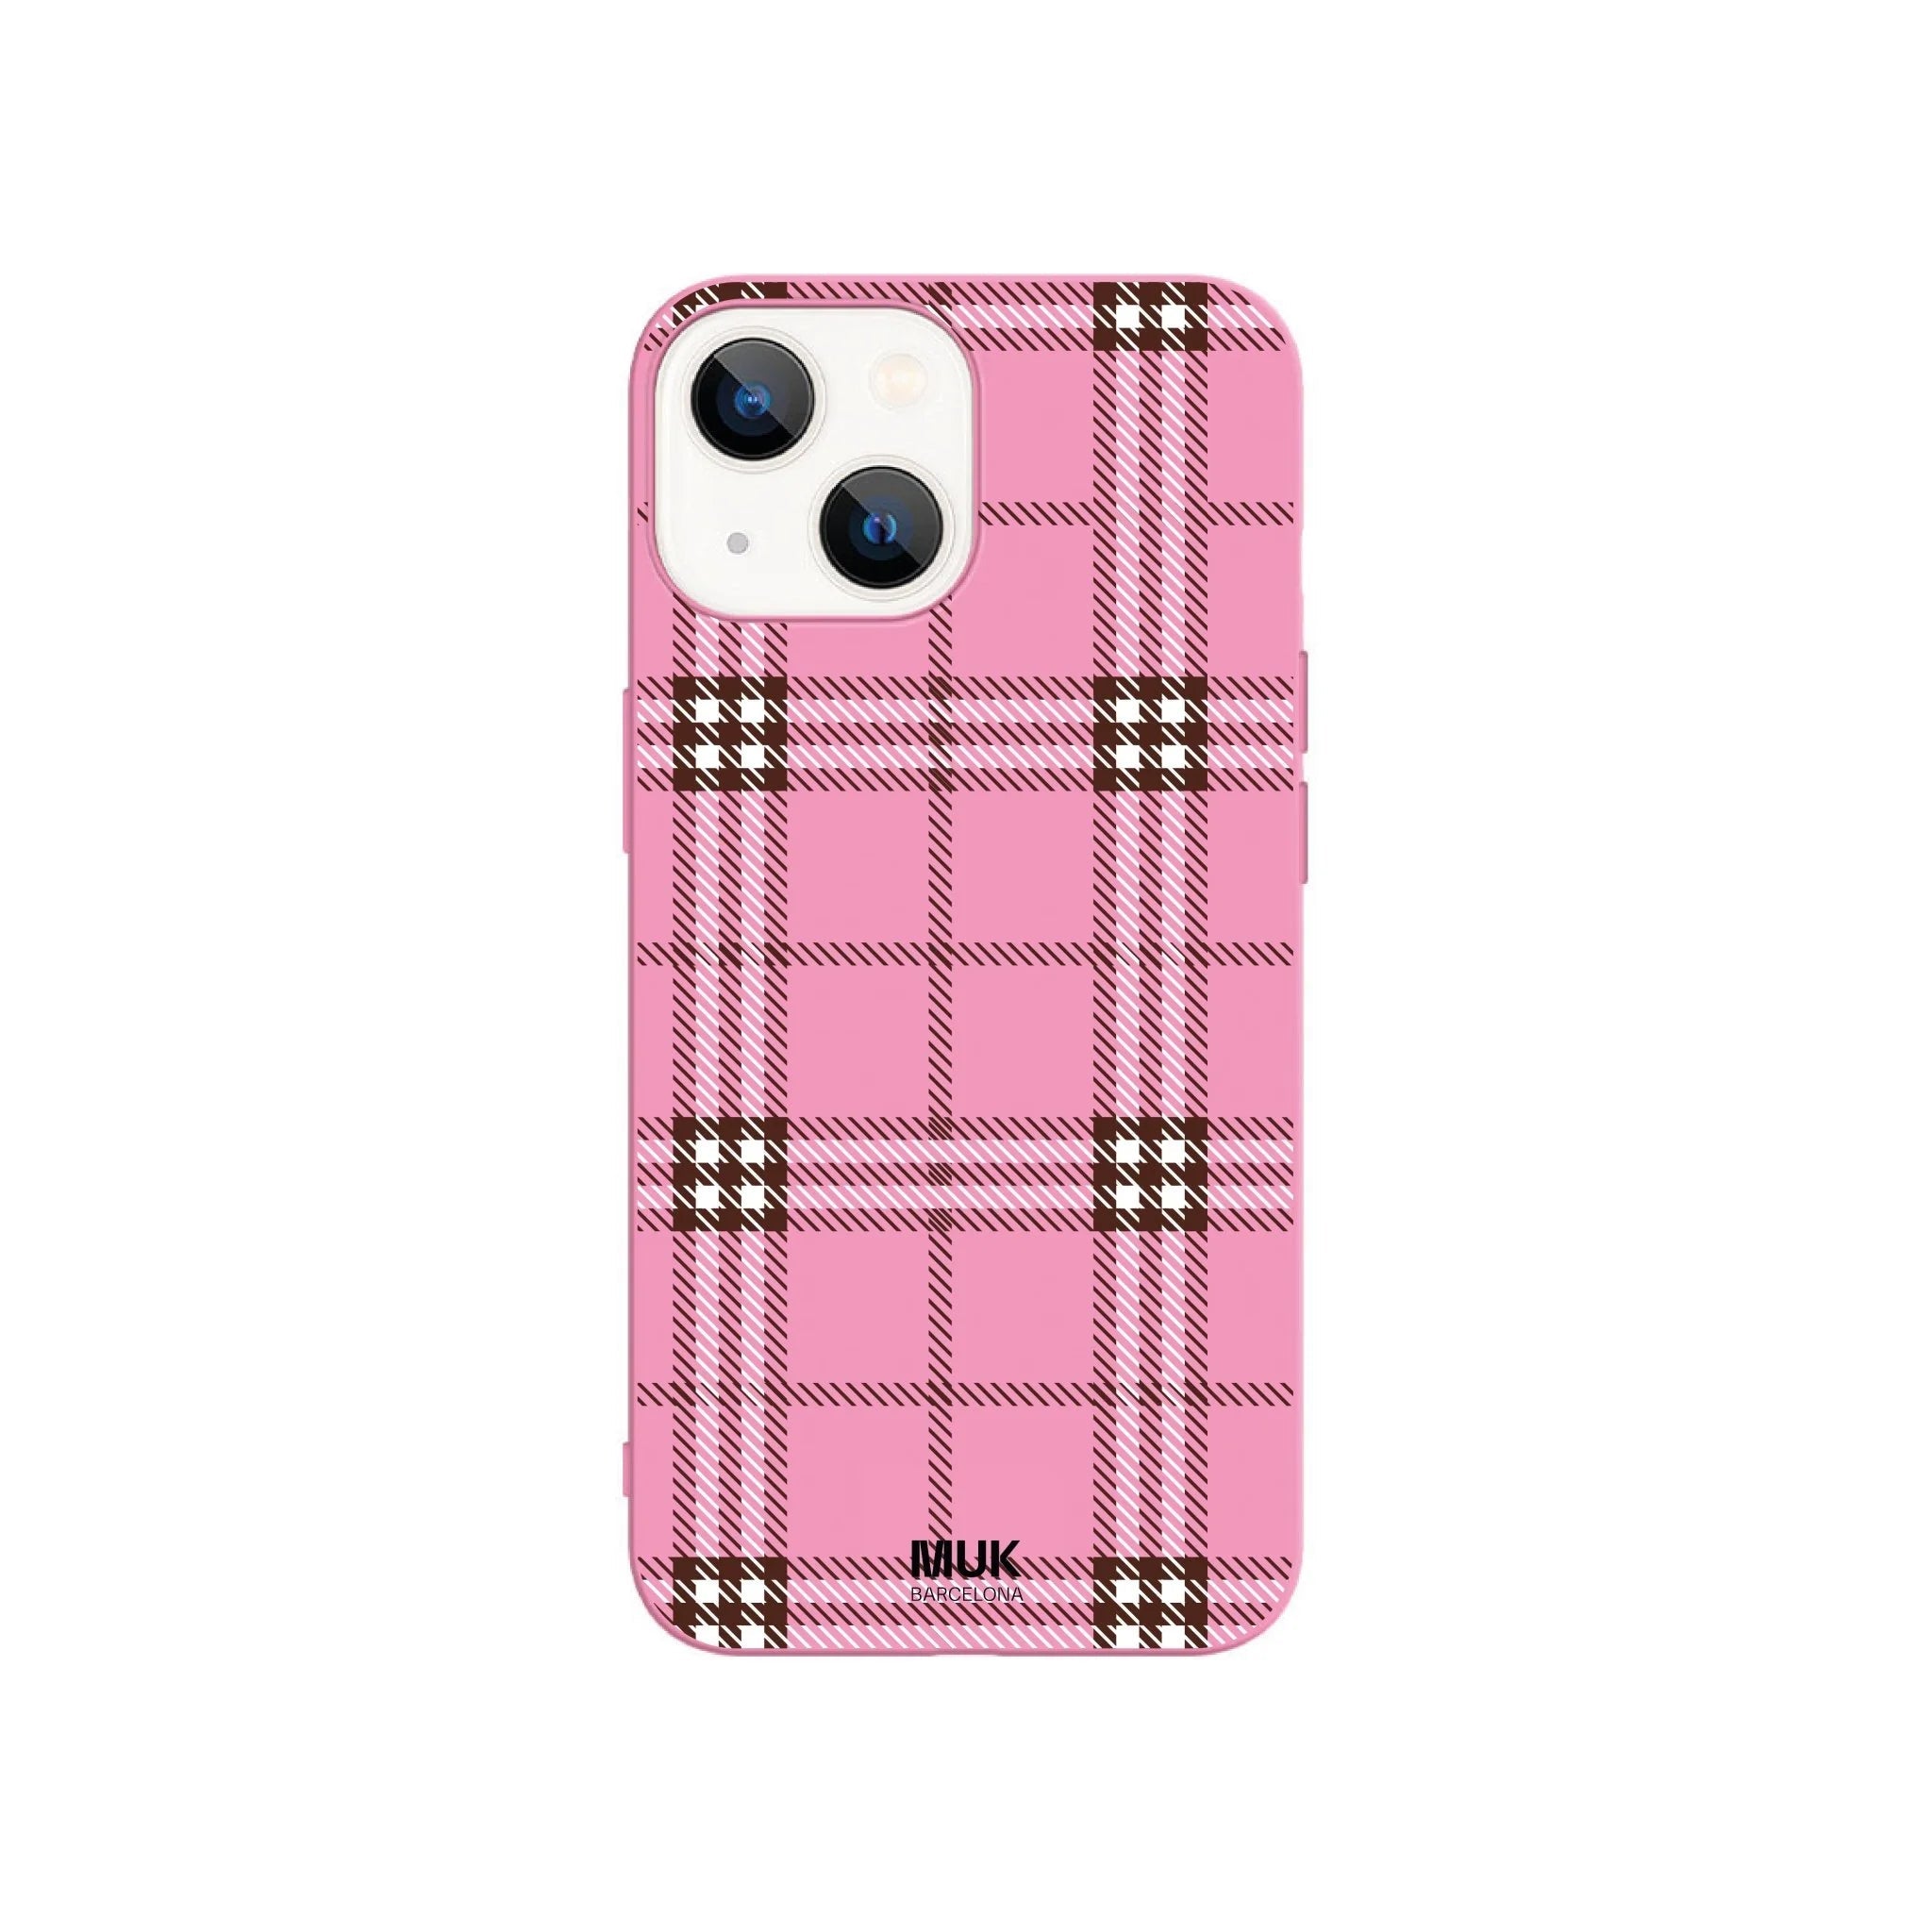 Pink TPU phone case with brown and white checkered pattern.
